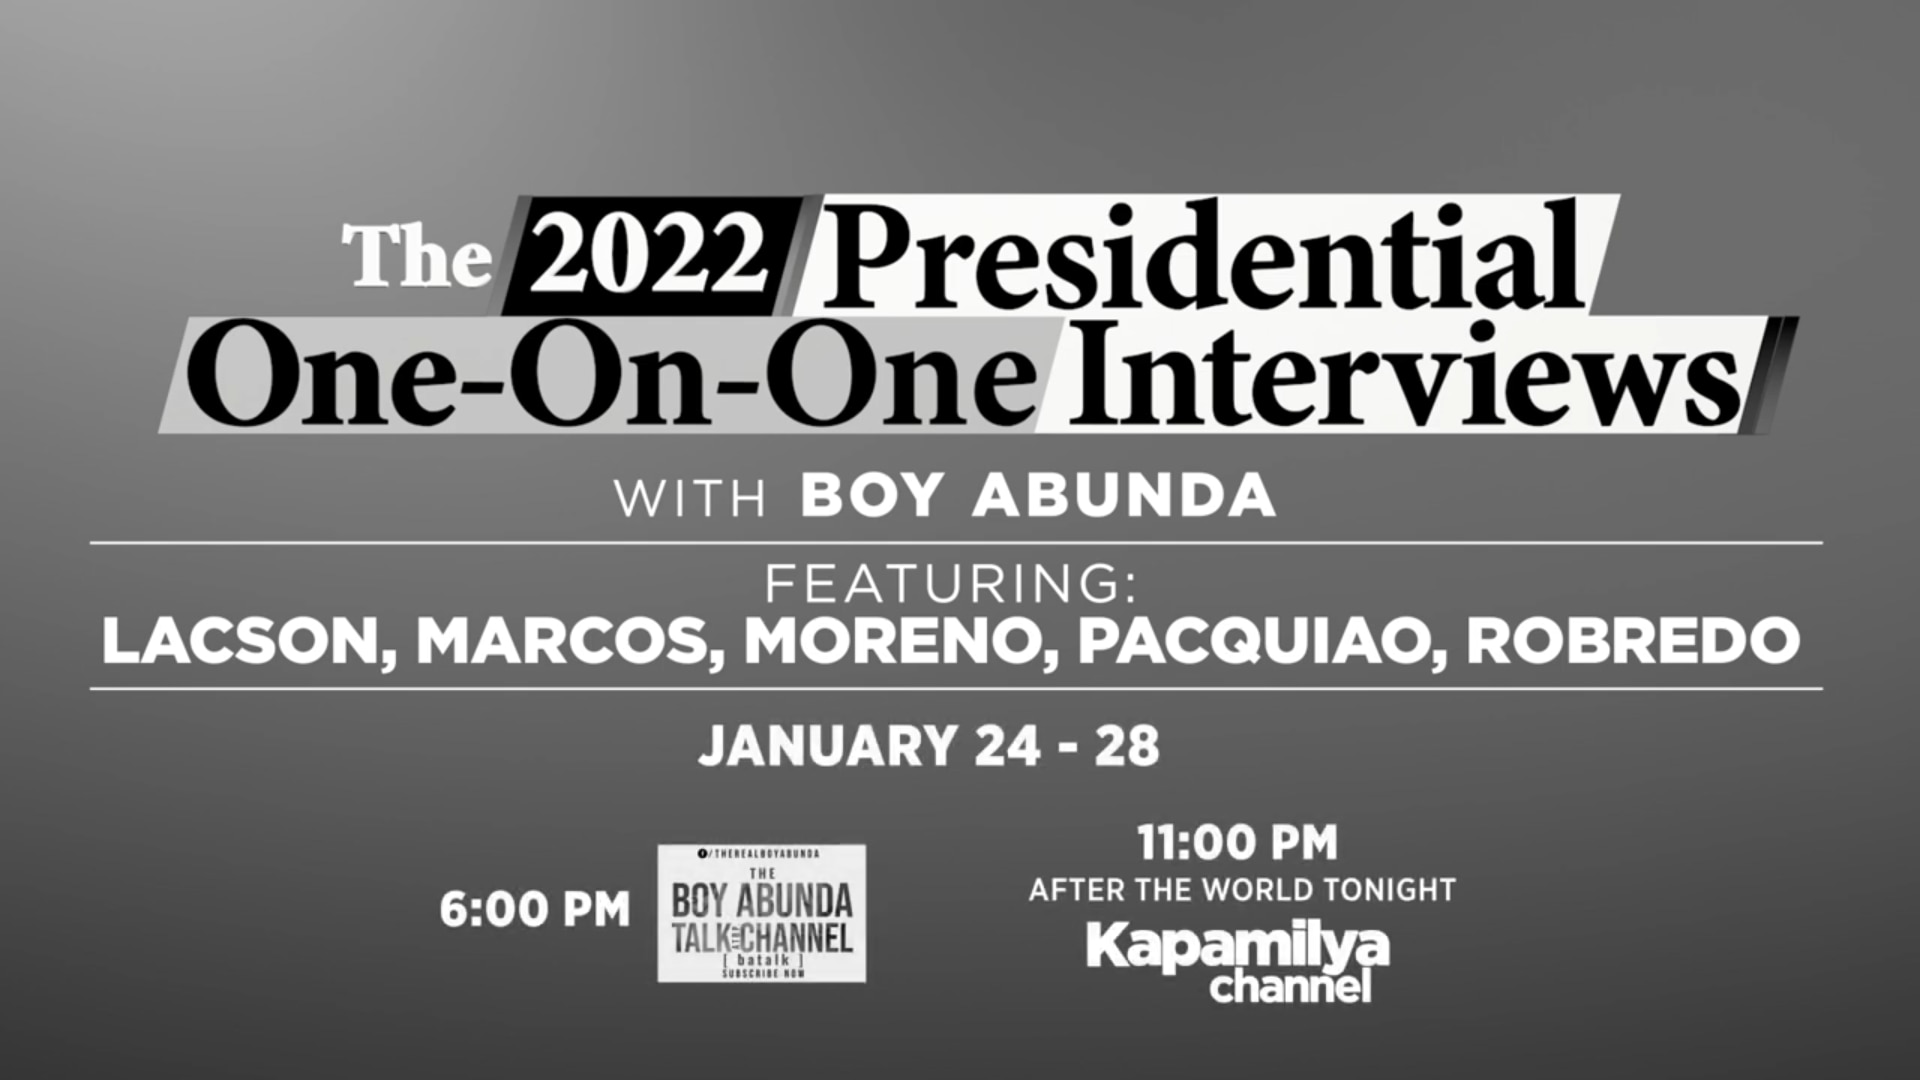 Boy Abunda goes one-on-one with PH presidentiables in special interview series